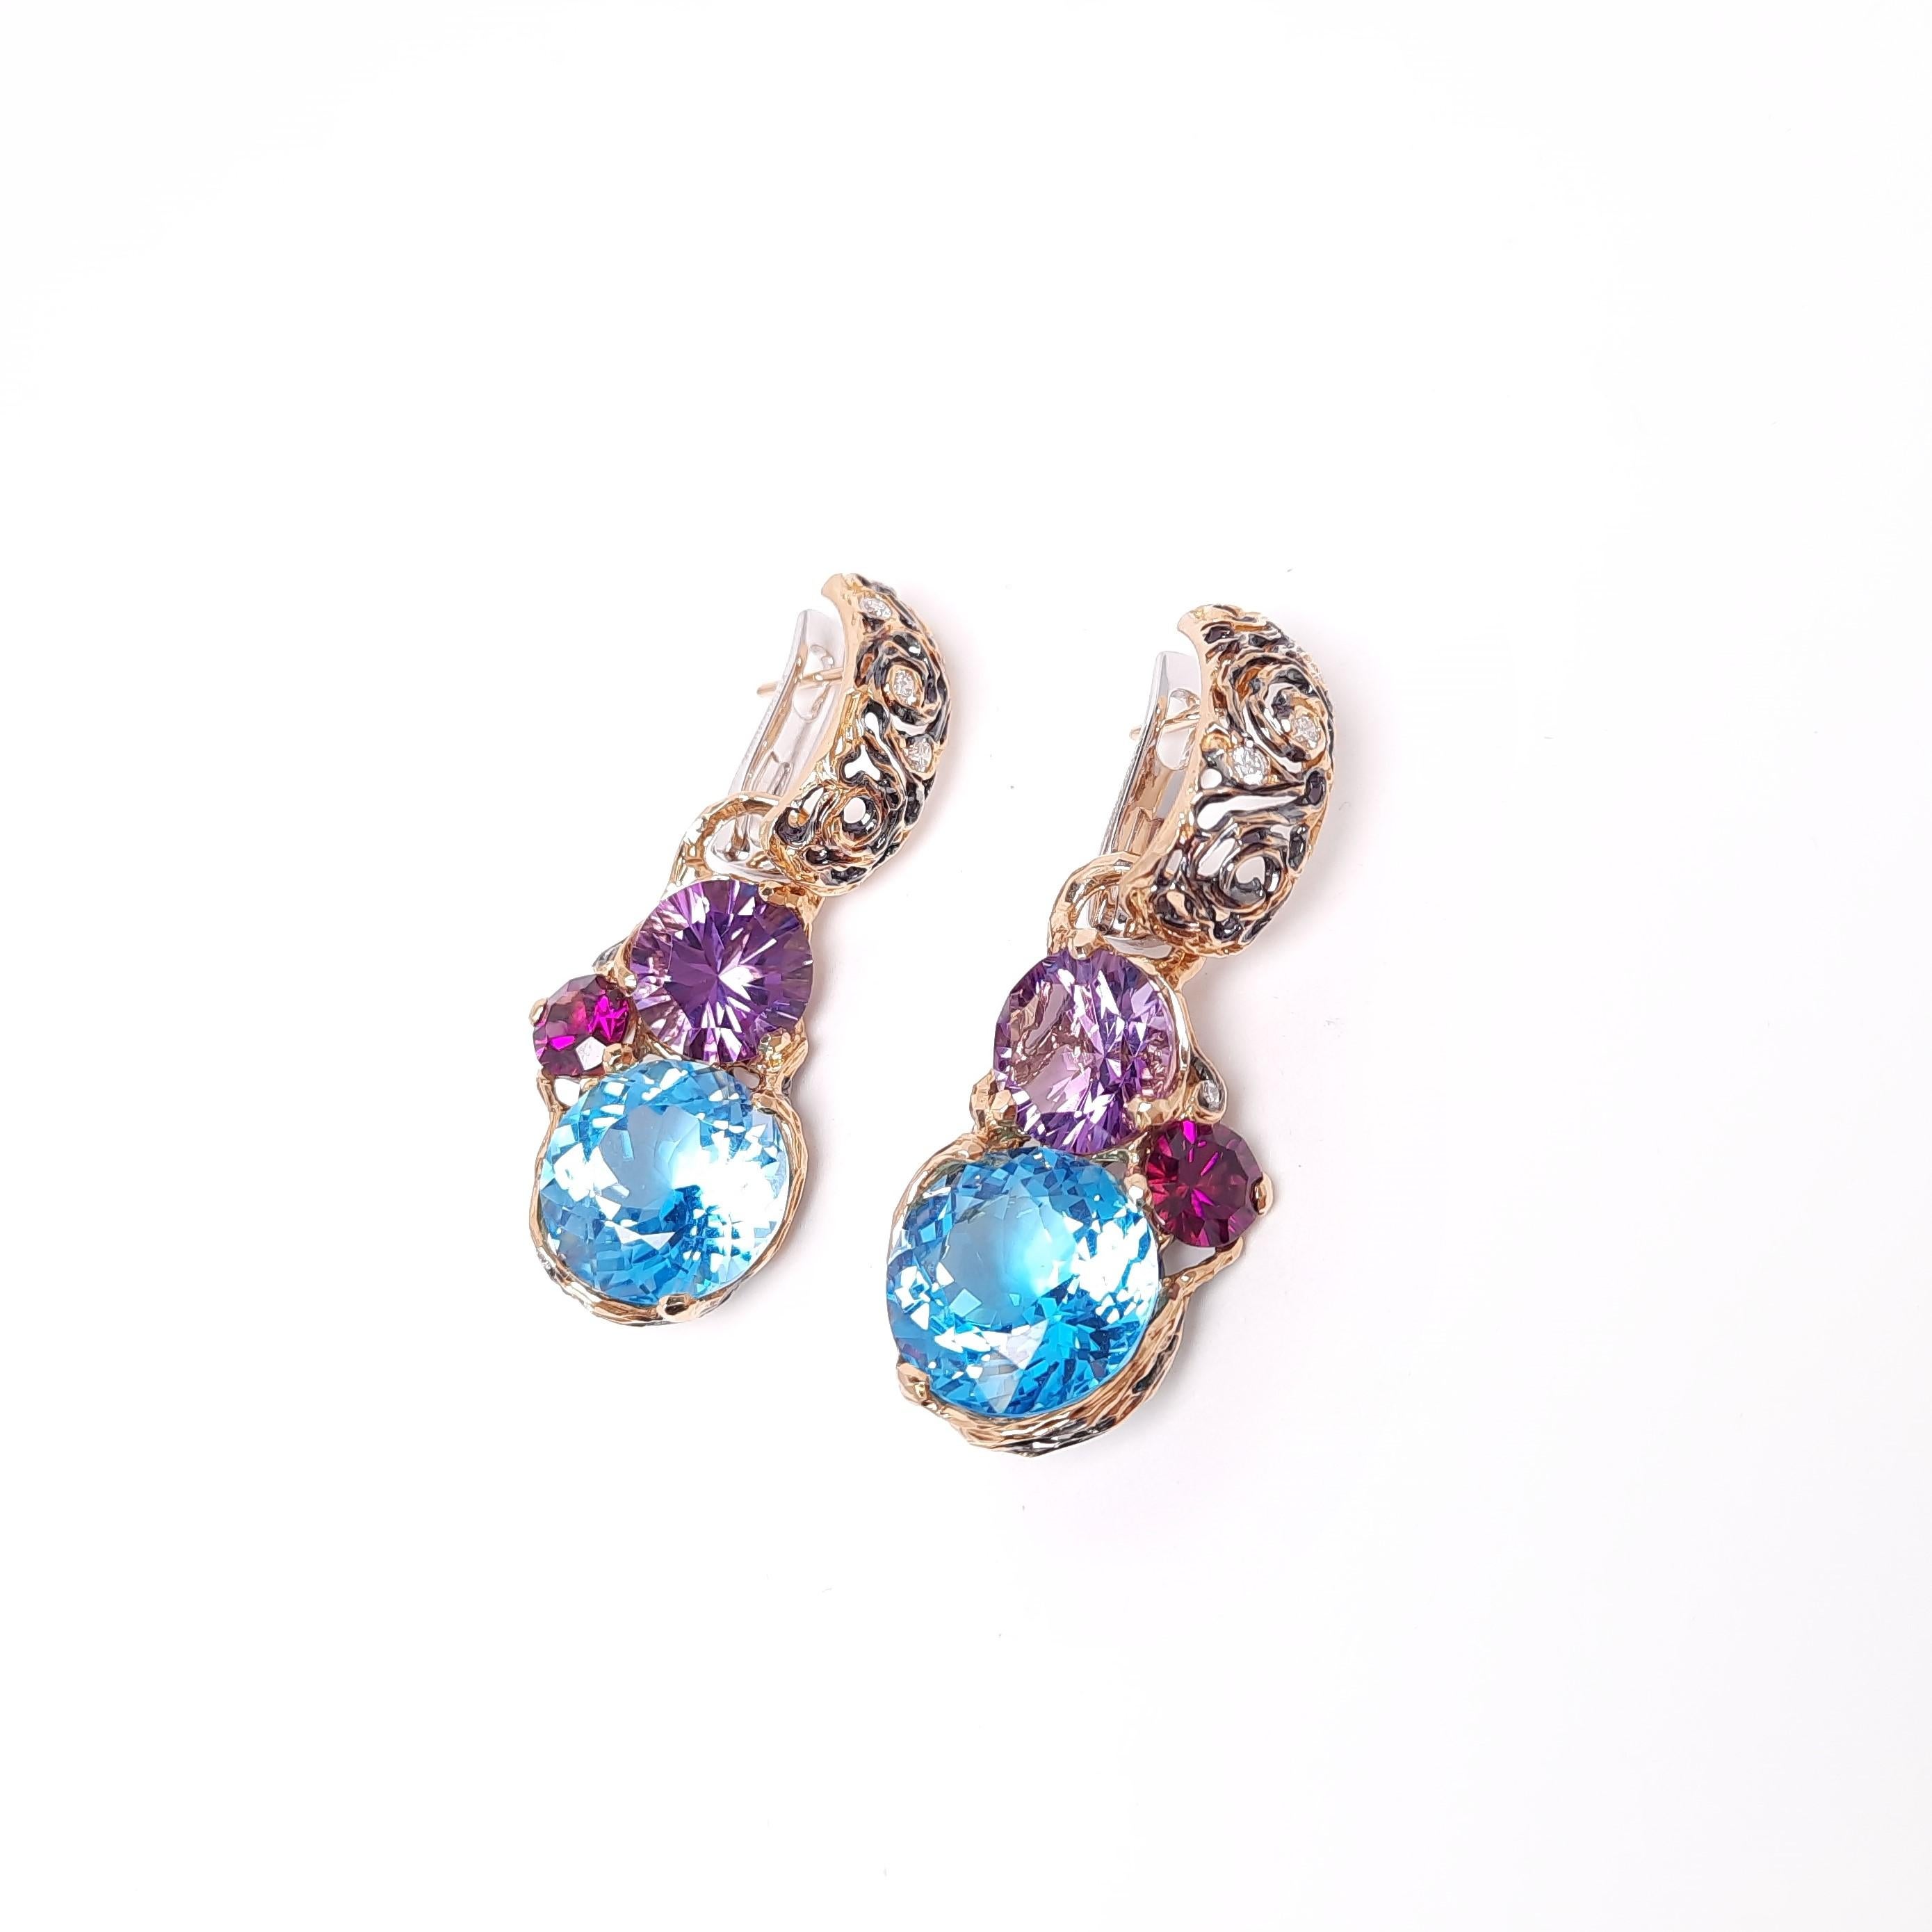 Inspired by Impressionism and Vincent Van Gogh's artistic paintings, MOISEIKIN created a starry night motif, handmade earrings with gold, diamonds, and multi-facet semi-precious stones such as Amethyst, Topaz, and Rhodolite. The colourful facetted